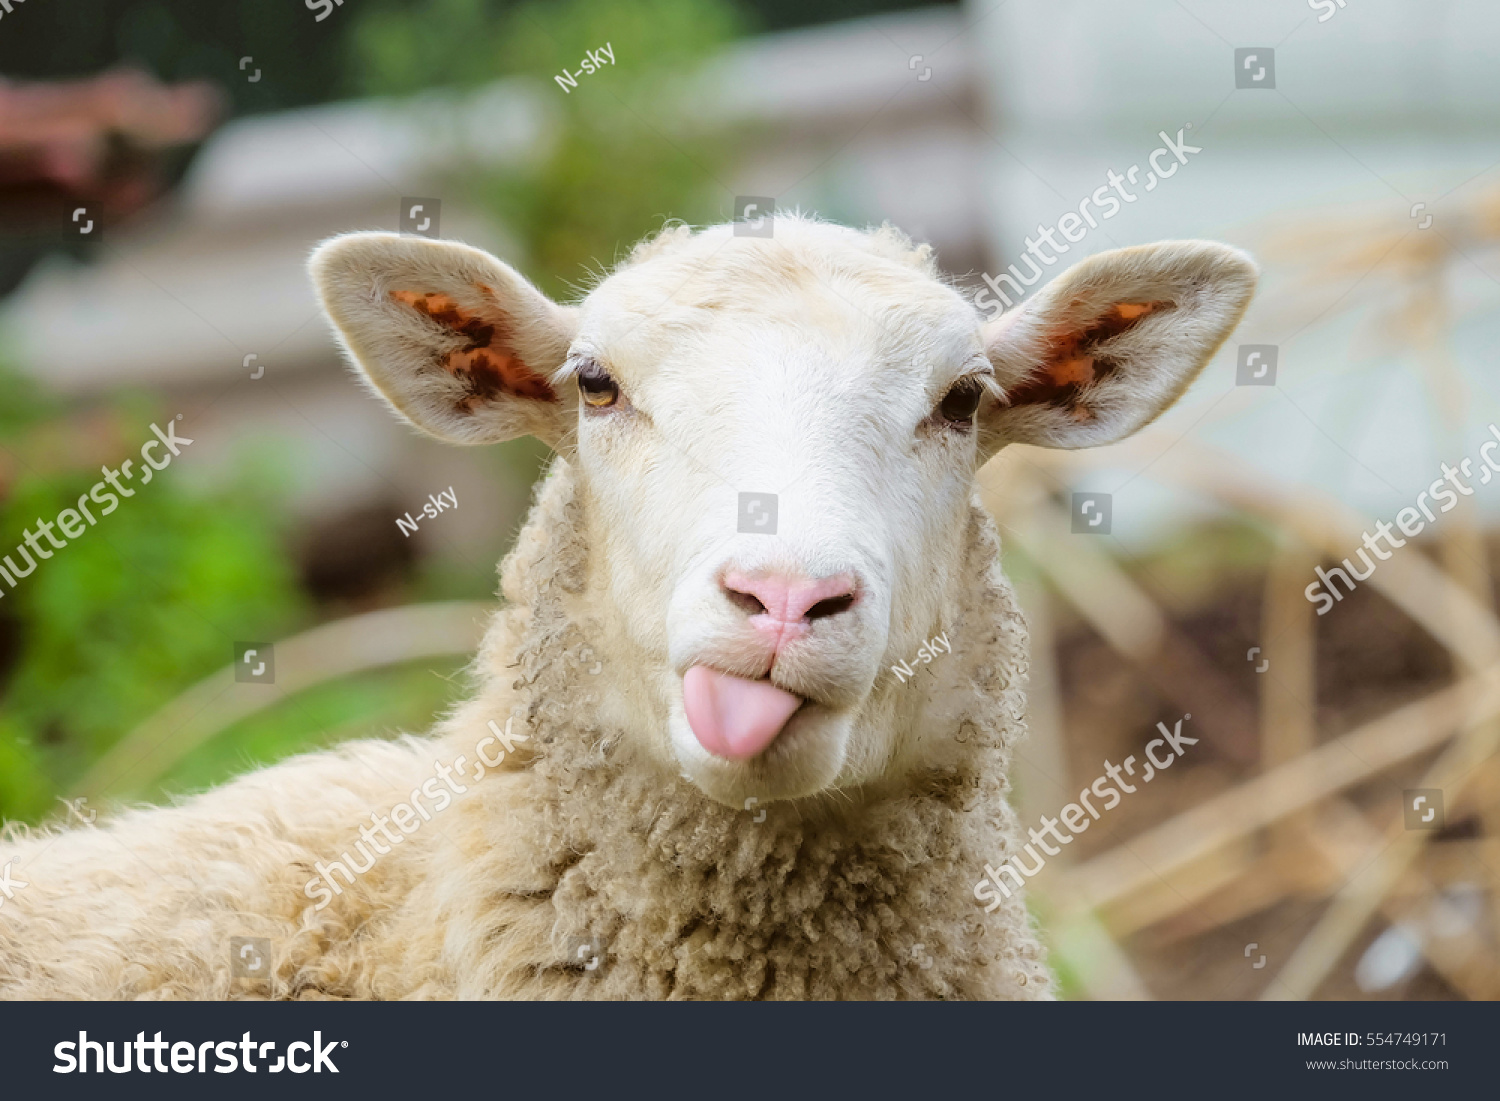 Funny sheep. Portrait of sheep showing tongue. #554749171